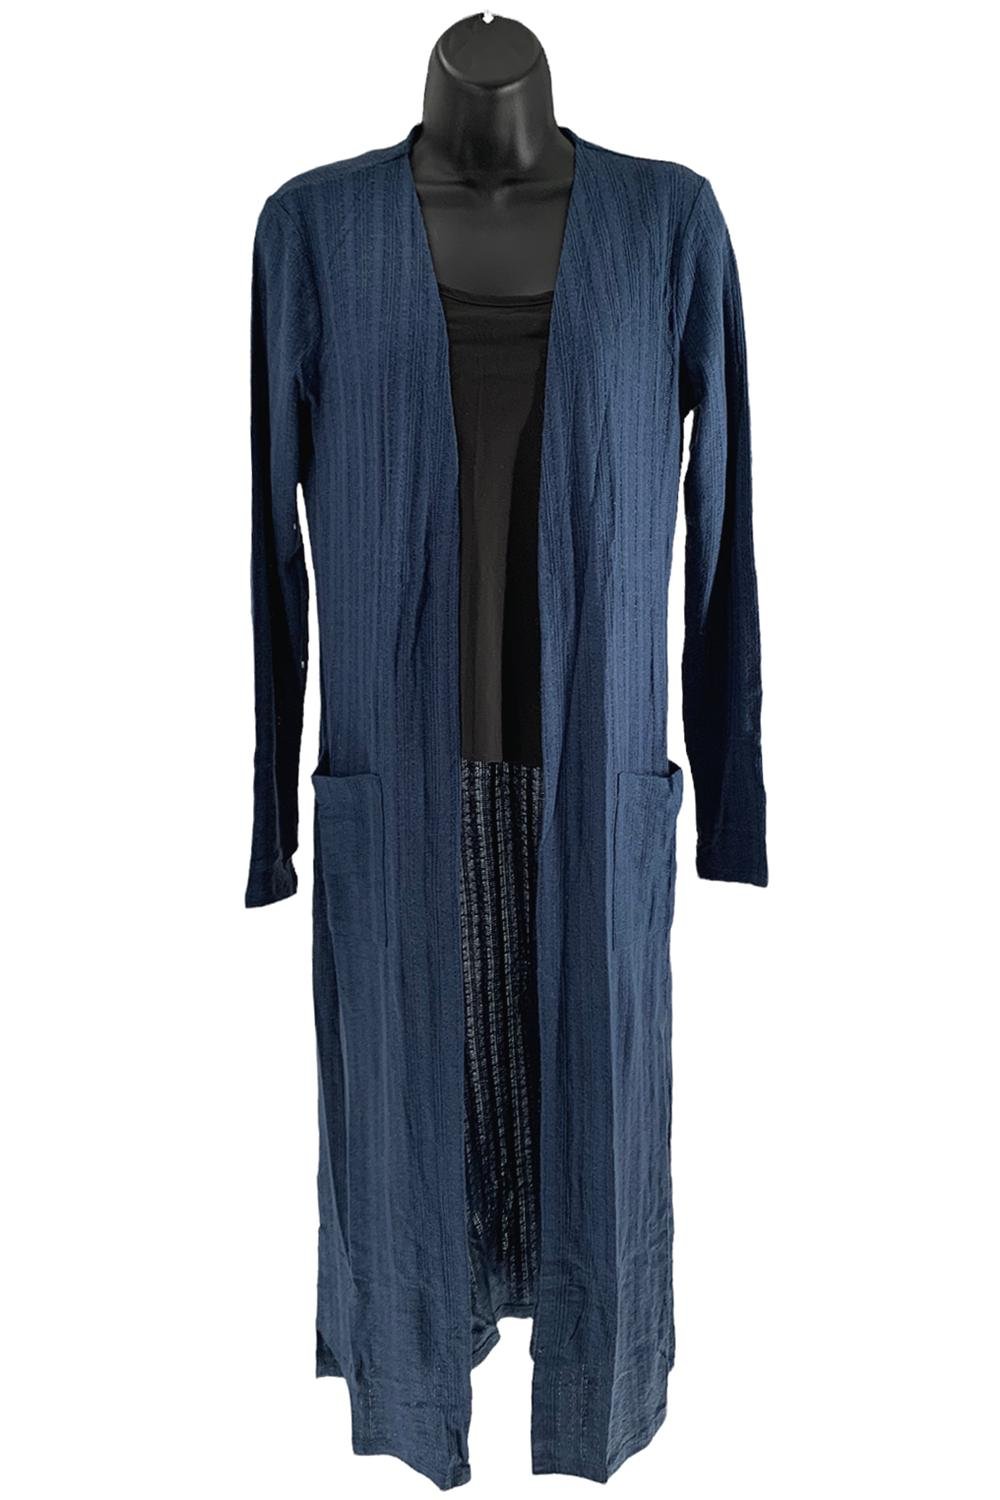 G by Giuliana Pointelle Knit Duster Cardigan